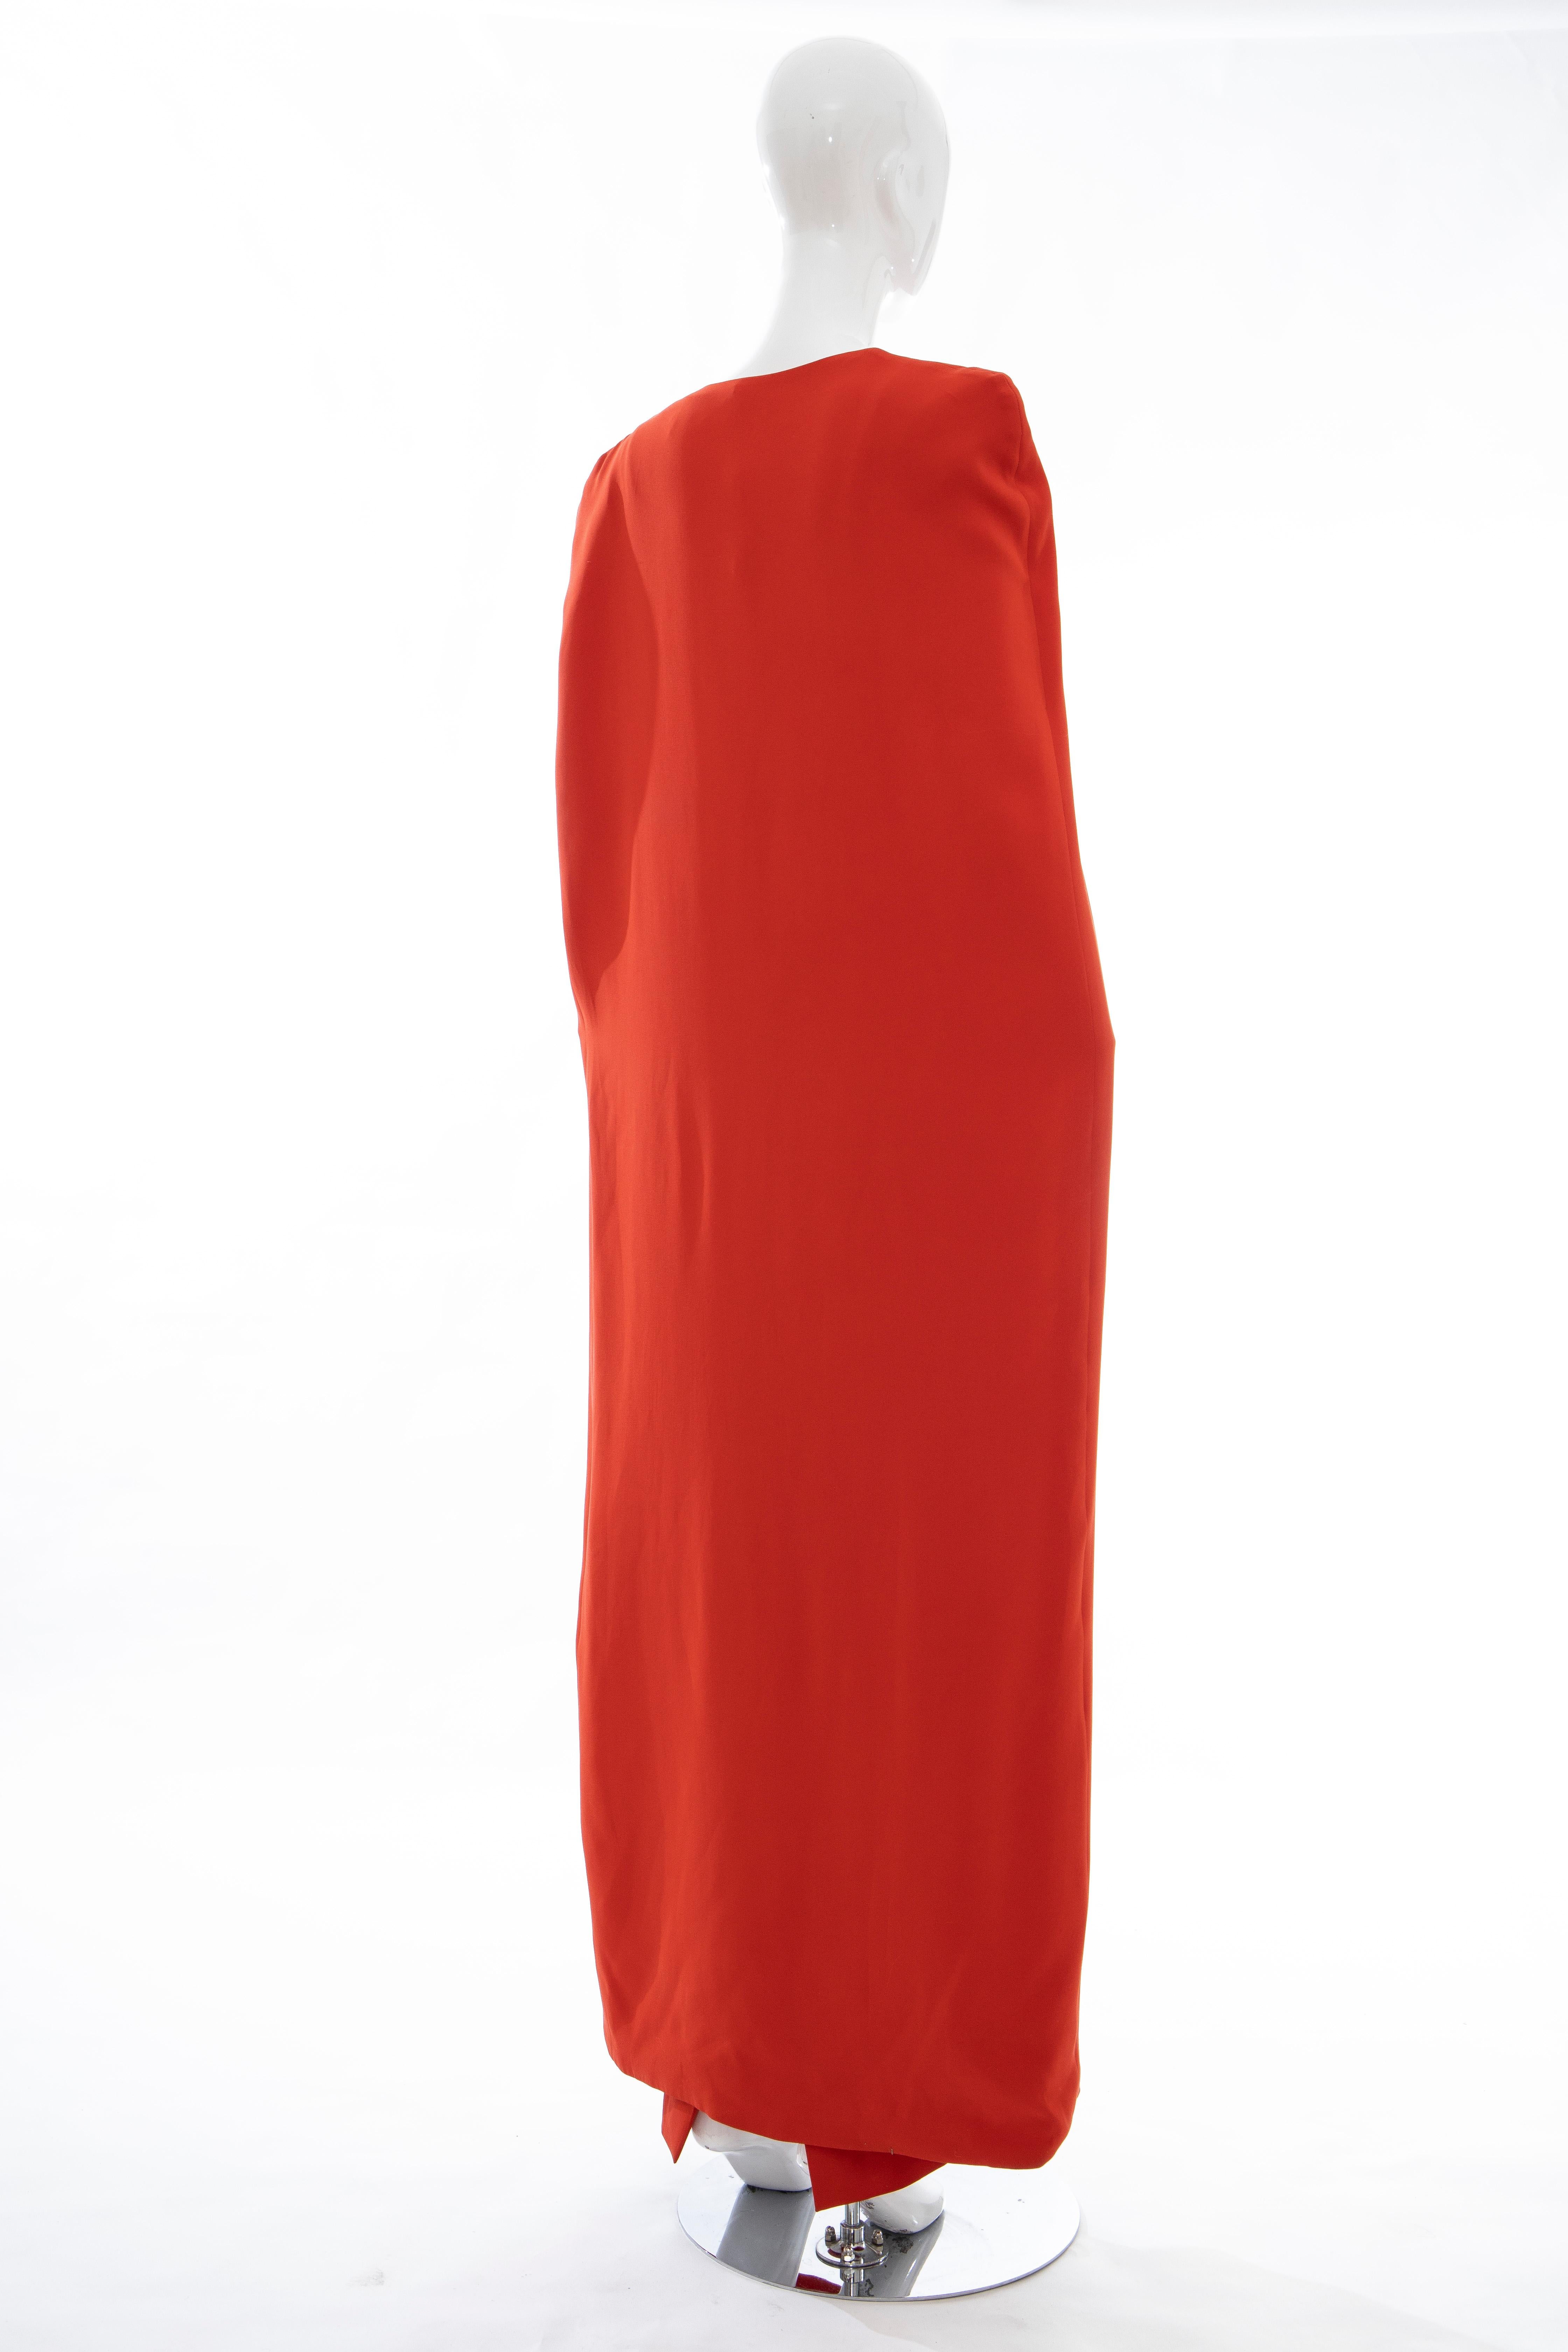 Red Tom Ford Runway Silk Persimmon Evening Dress With Cape, Fall 2012